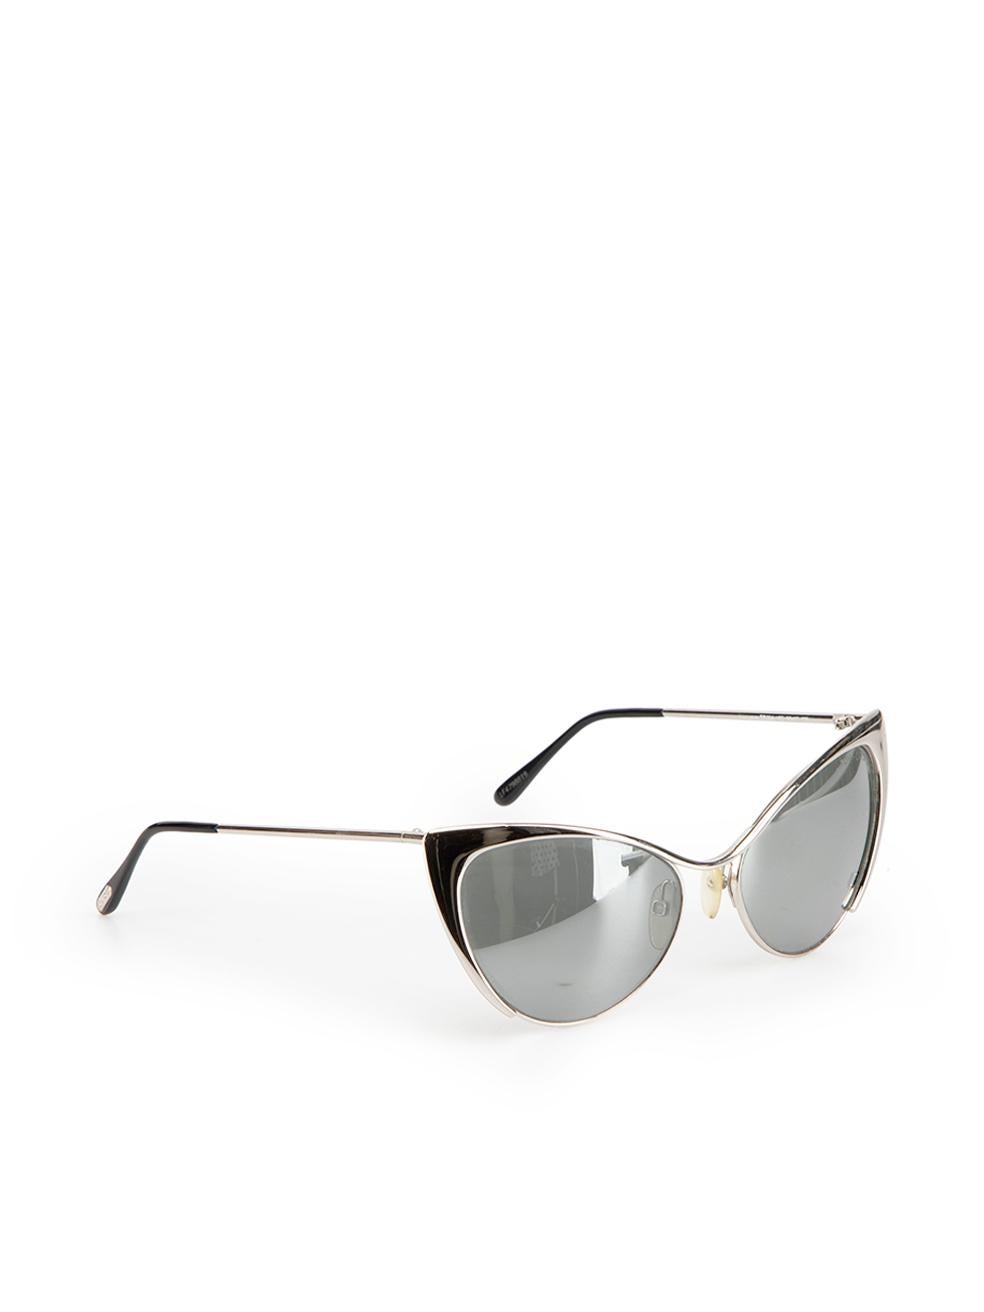 CONDITION is Very good. Minimal wear to sunglasses is evident. Minimal wear to the lenses with spotting to the mirrored effect on this used Tom Ford designer resale item. These sunglasses come with original case.

Details
Silver
Metal
Sunglasses
Cat